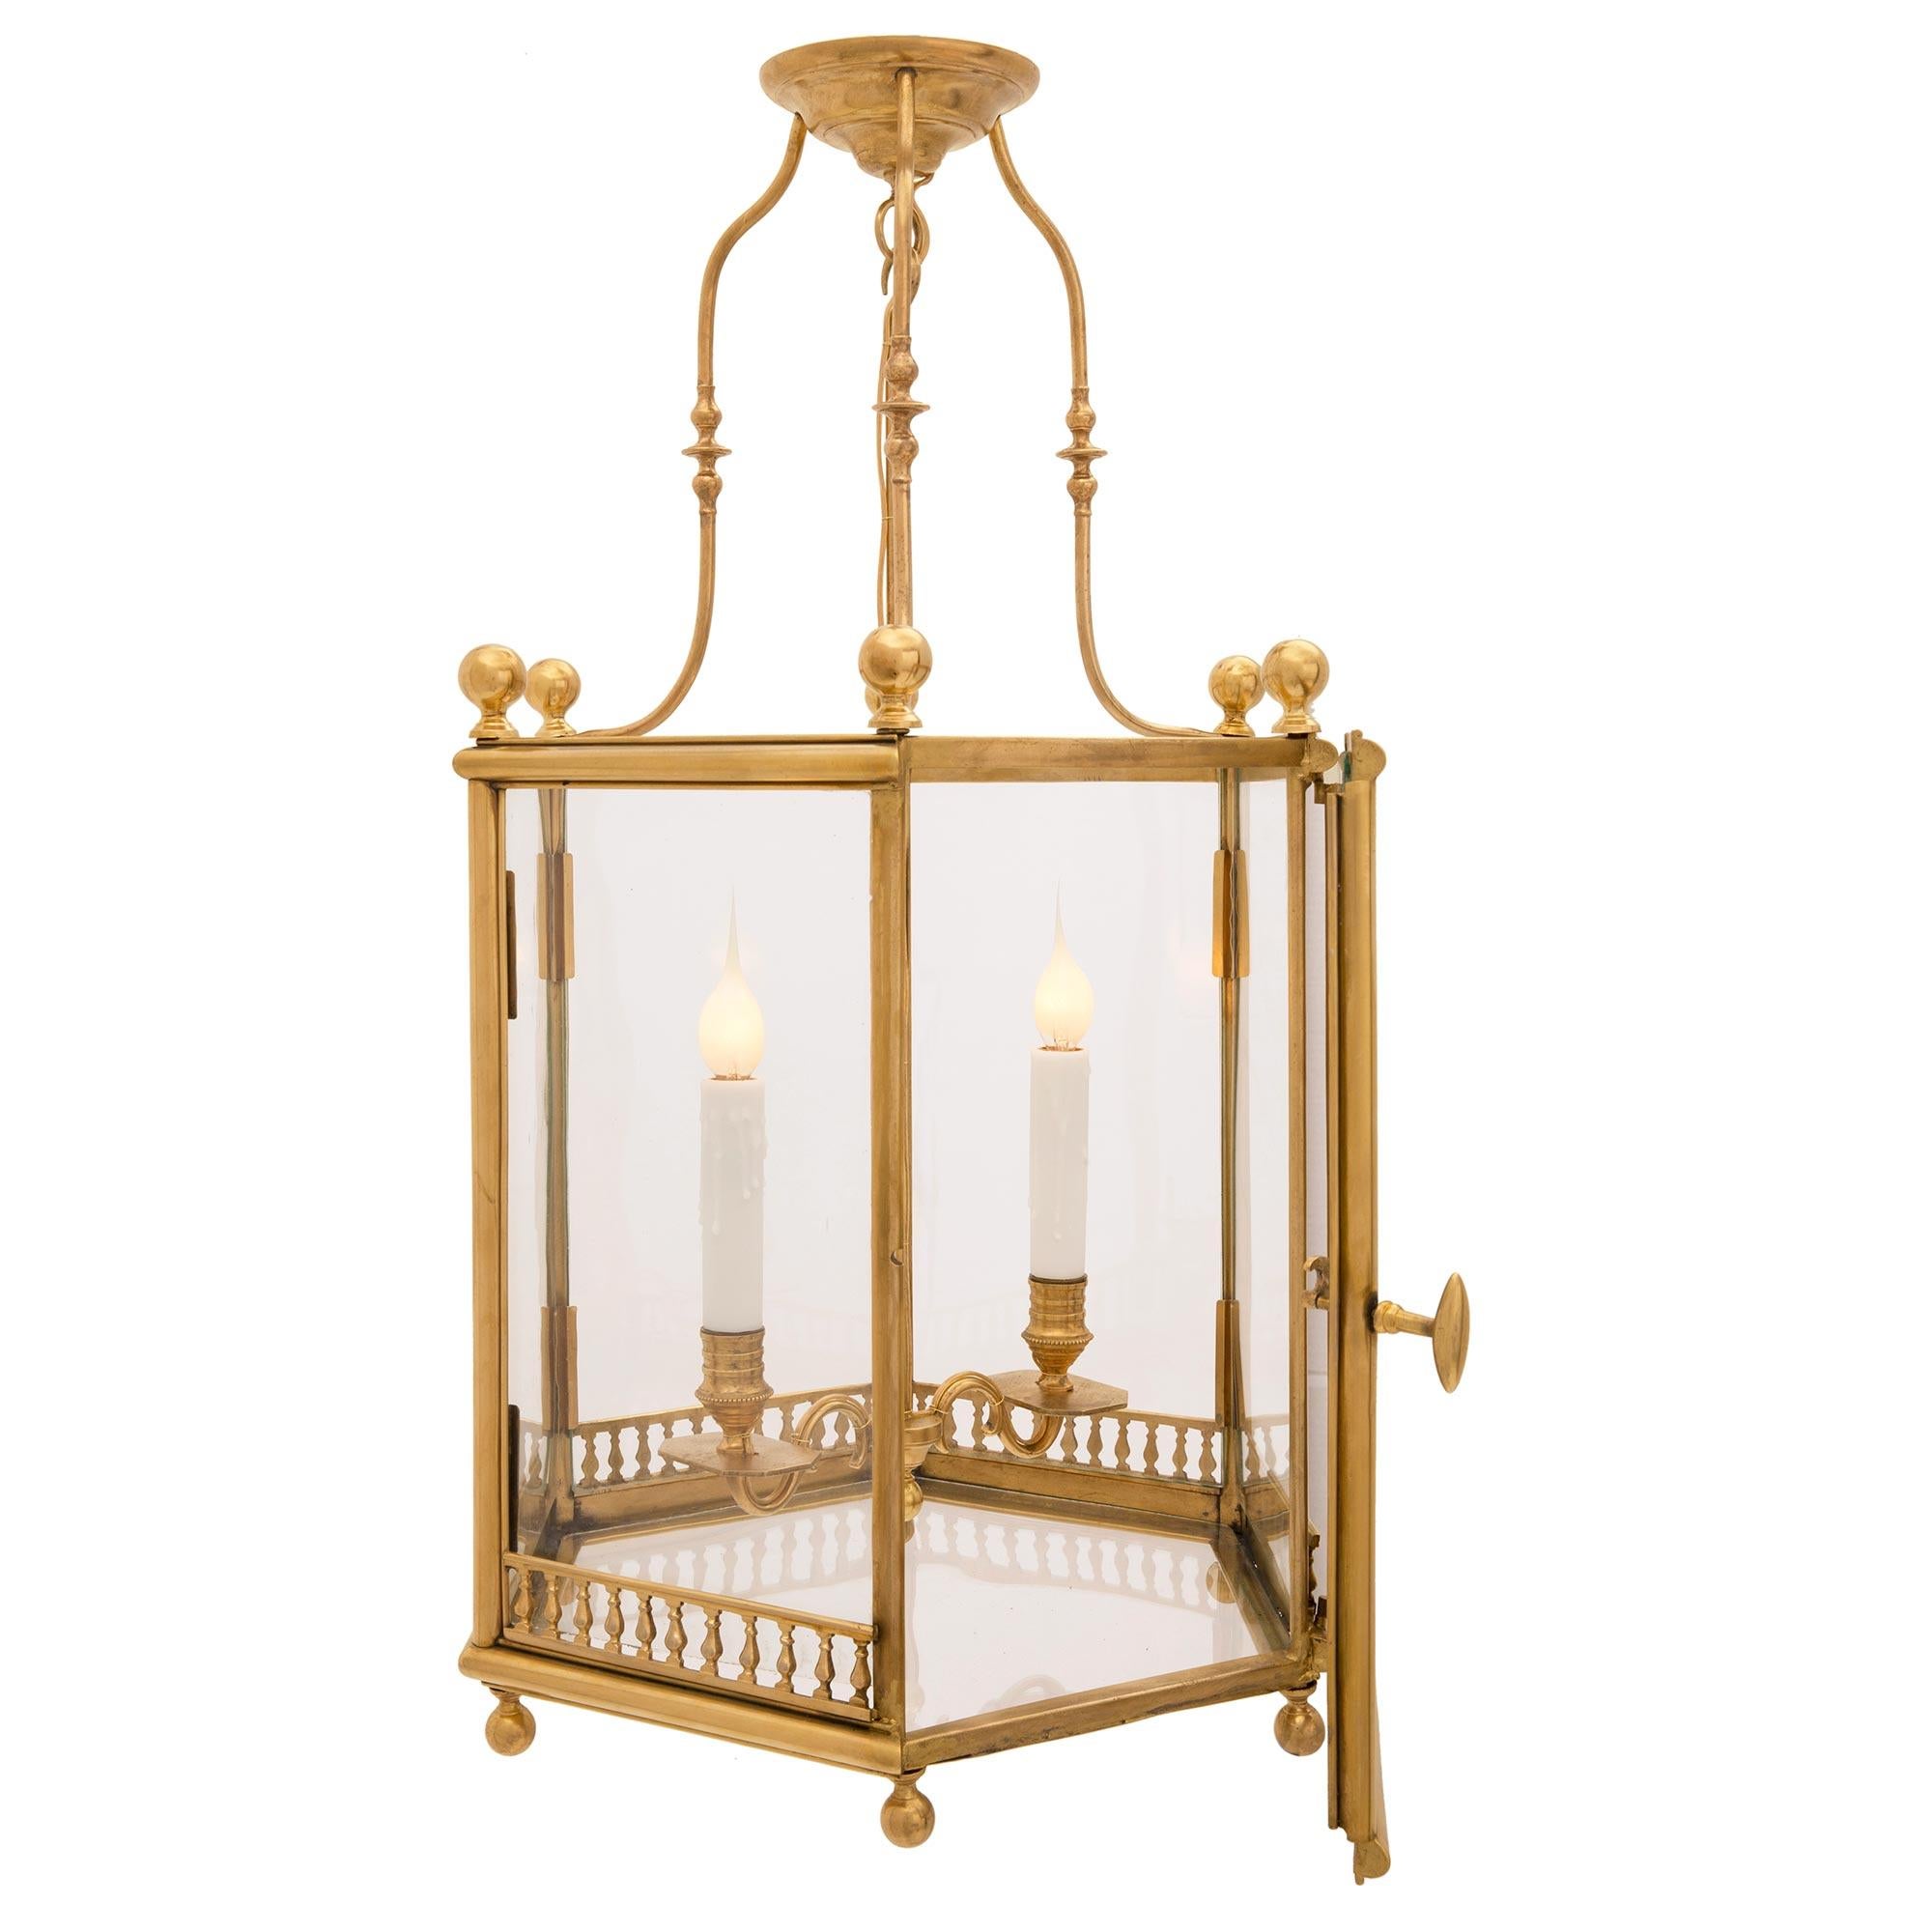 A charming and most decorative French 19th century Louis XVI st. ormolu and glass lantern. The hexagonal shaped lantern displays six fine bottom ball finials below an elegant mottled band. Each side retains their orignal glass panes above the lovely